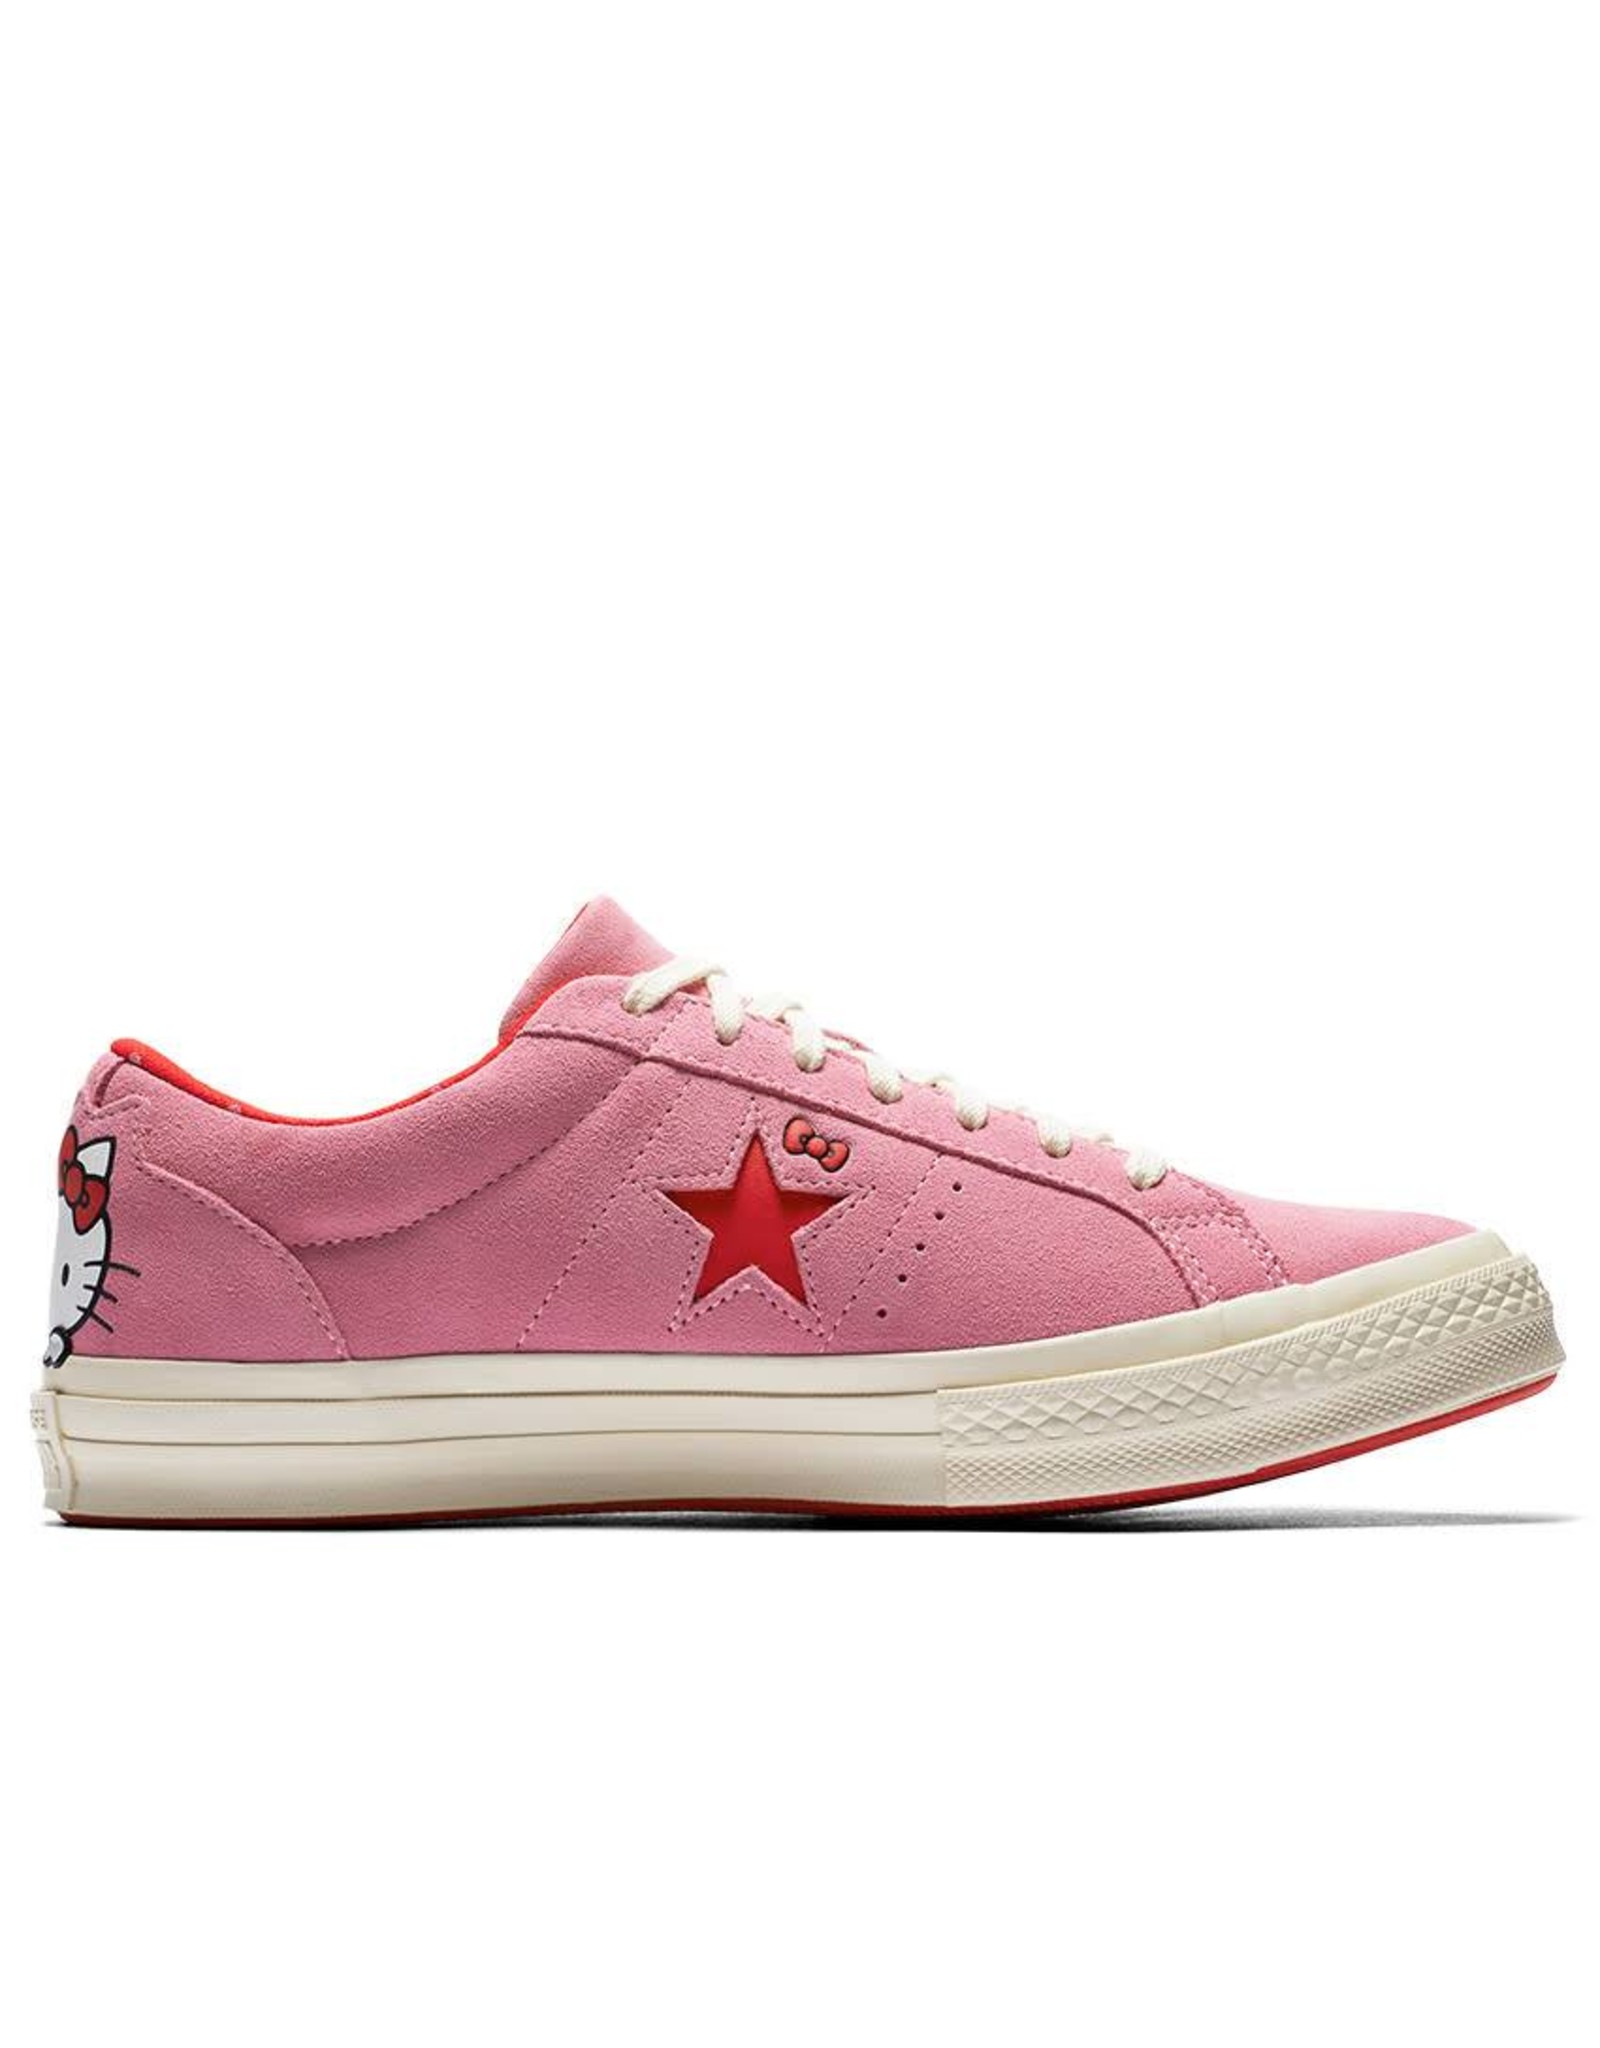 converse one star red and pink